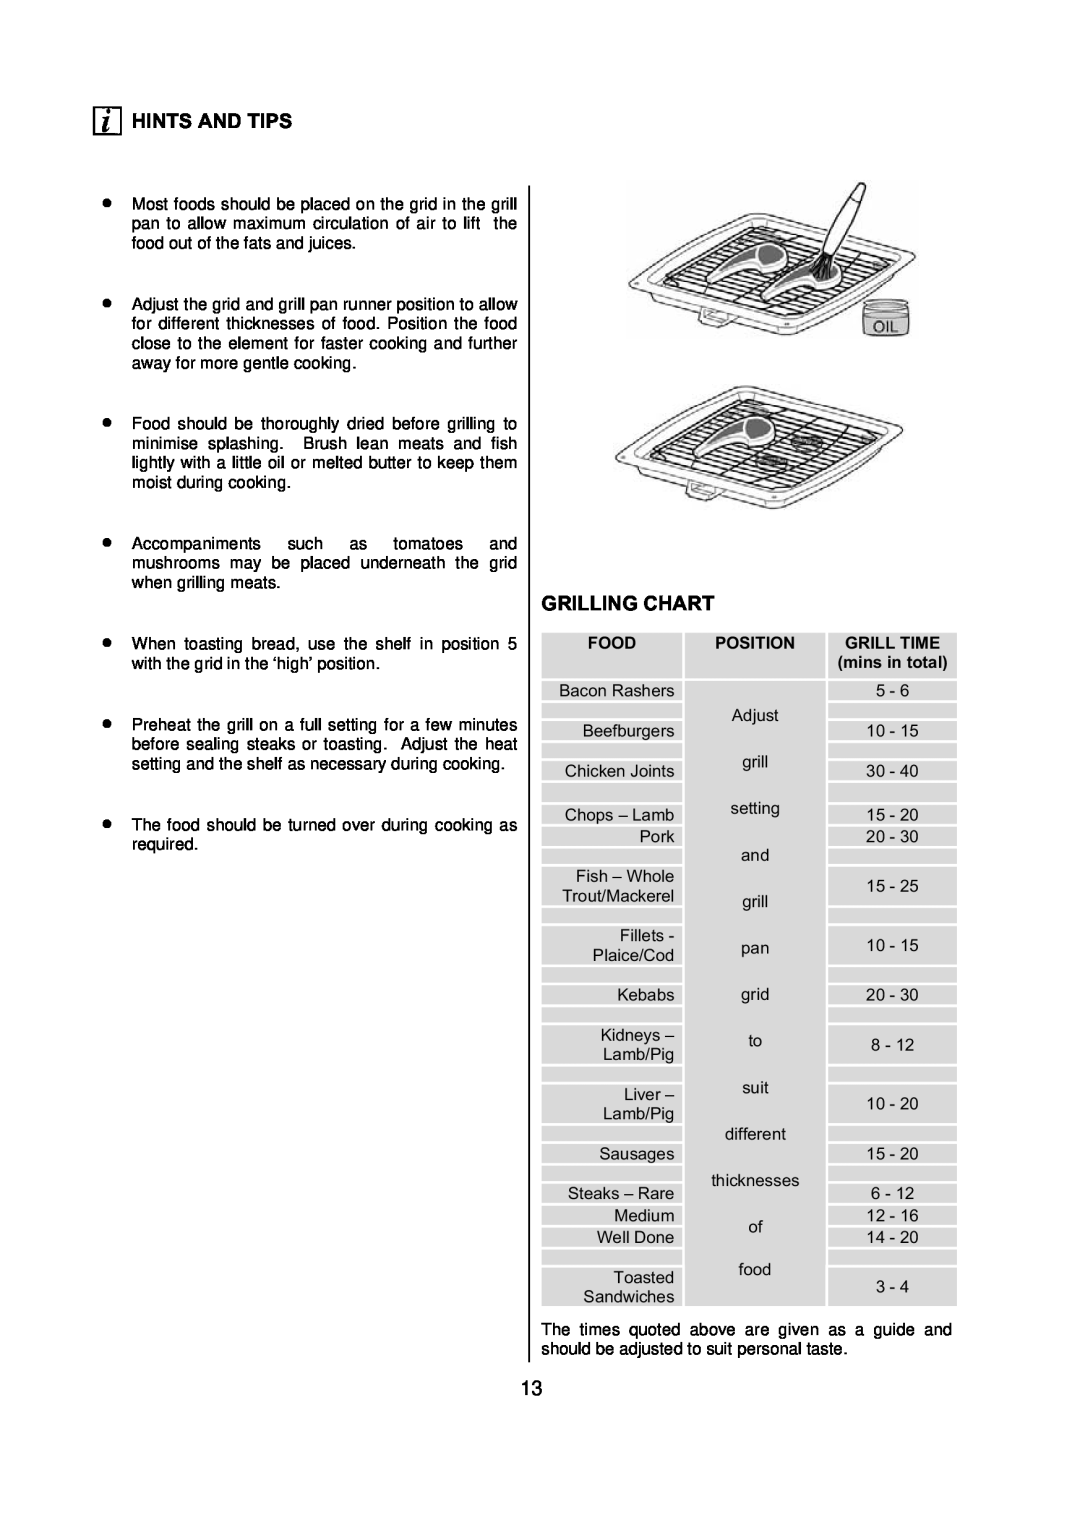 Electrolux D77000 user manual Grilling Chart, Food, Position, Grill Time, Hints And Tips 